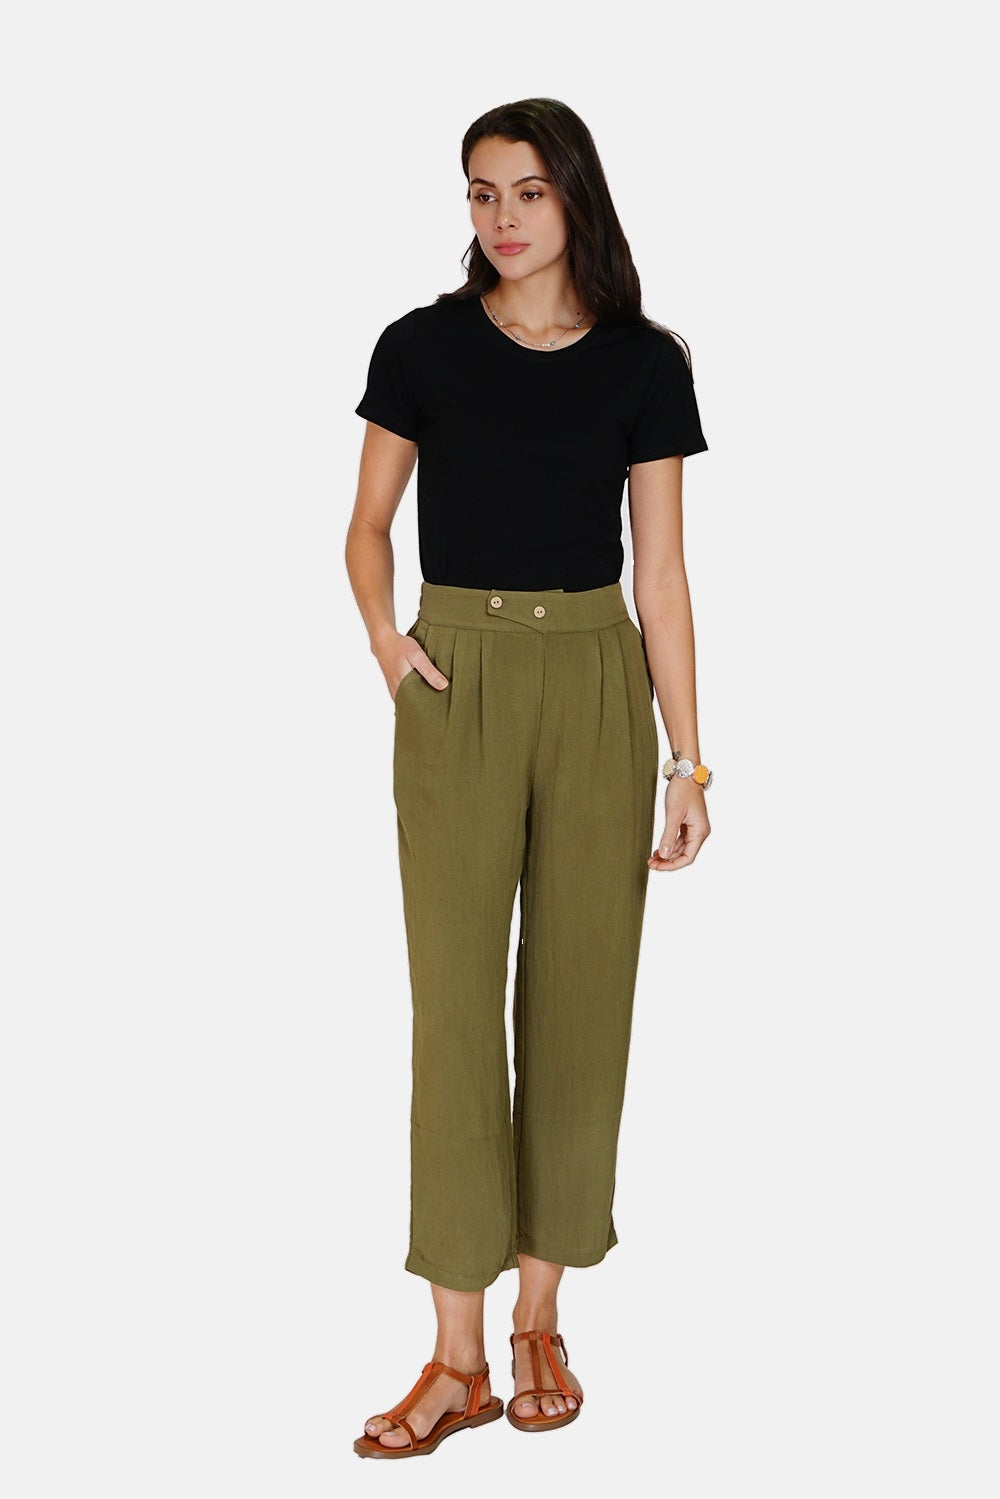 Fancy belted pants with high-waisted buttons